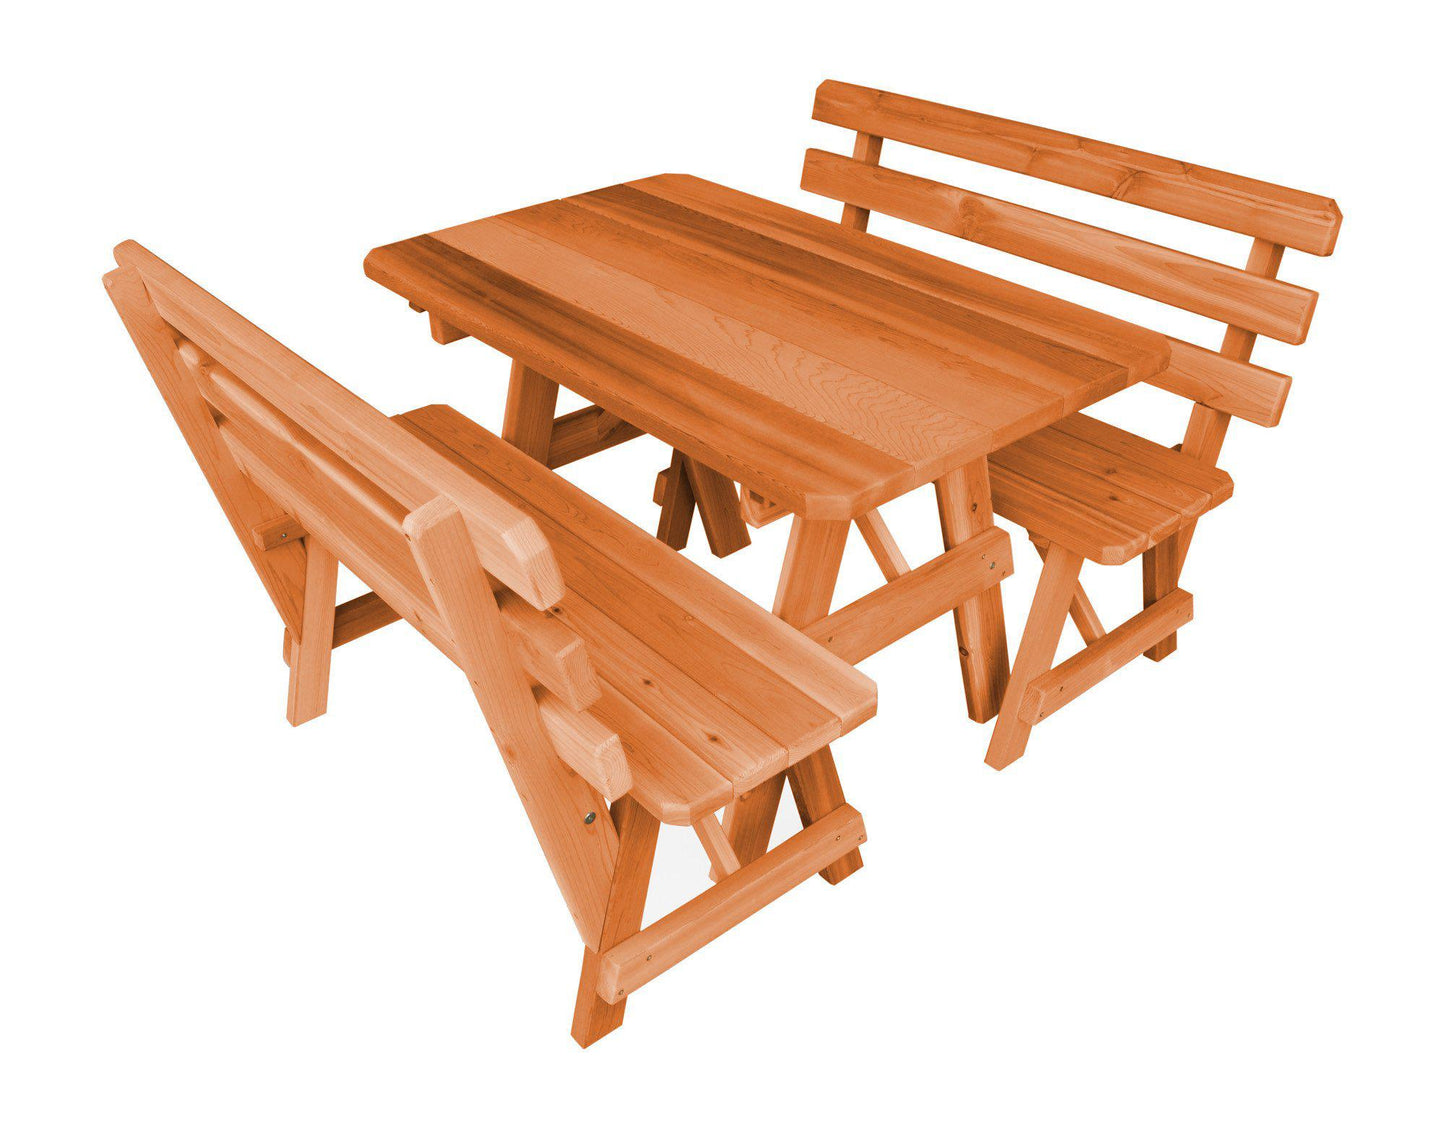 A&L FURNITURE CO. Western Red Cedar 94" Table w/2 Backed Benches - Specify for FREE 2" Umbrella Hole - LEAD TIME TO SHIP 2 WEEKS